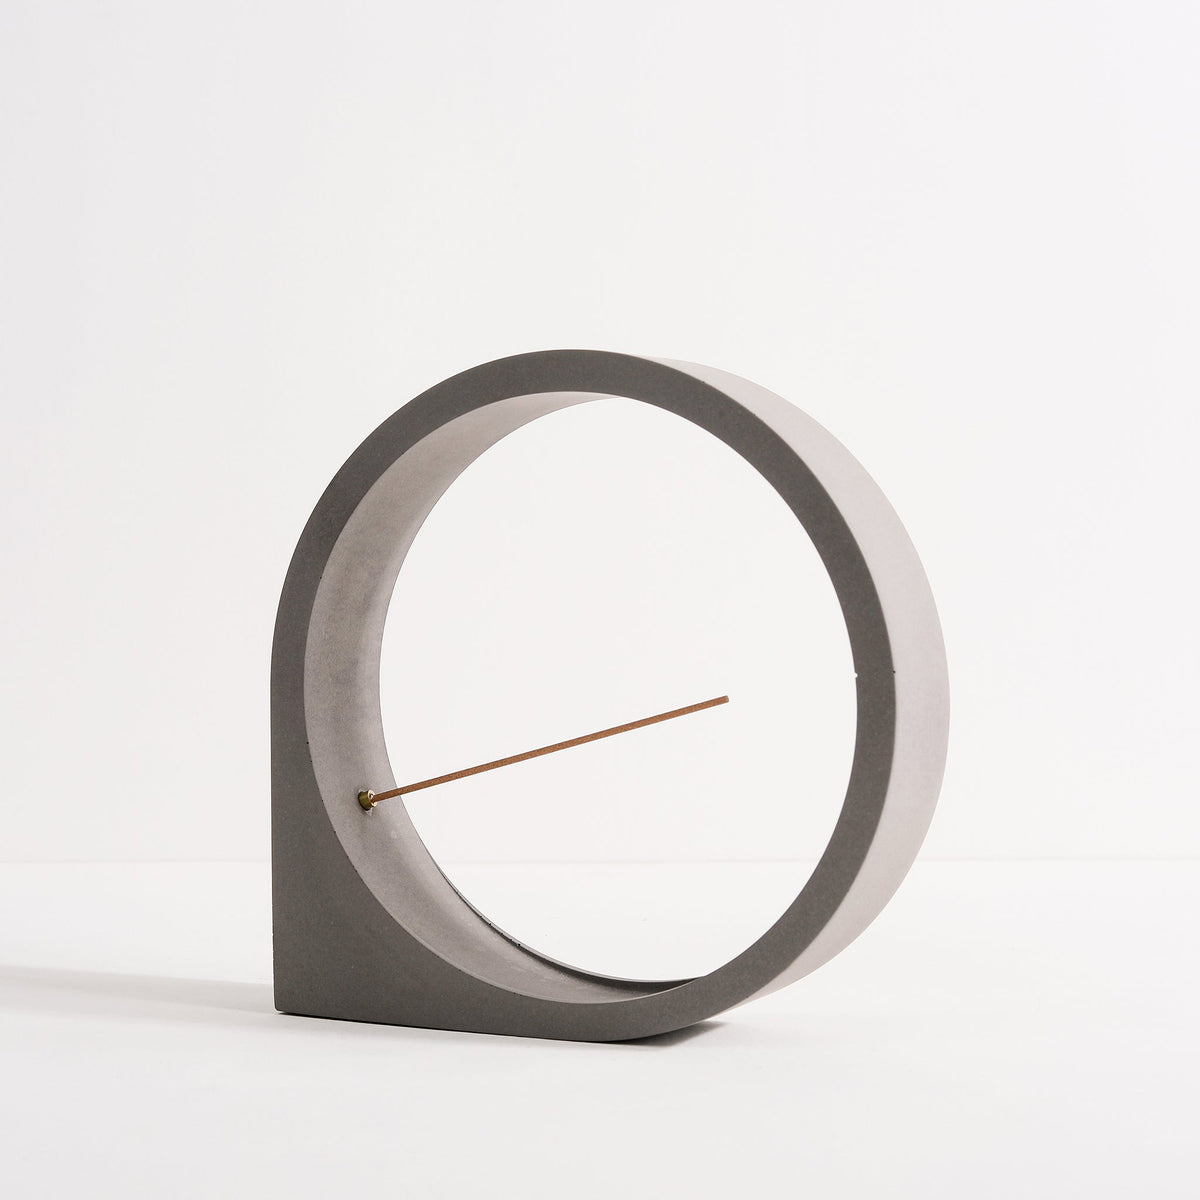 Front angled view of a concrete round incense holder by Kin Objects